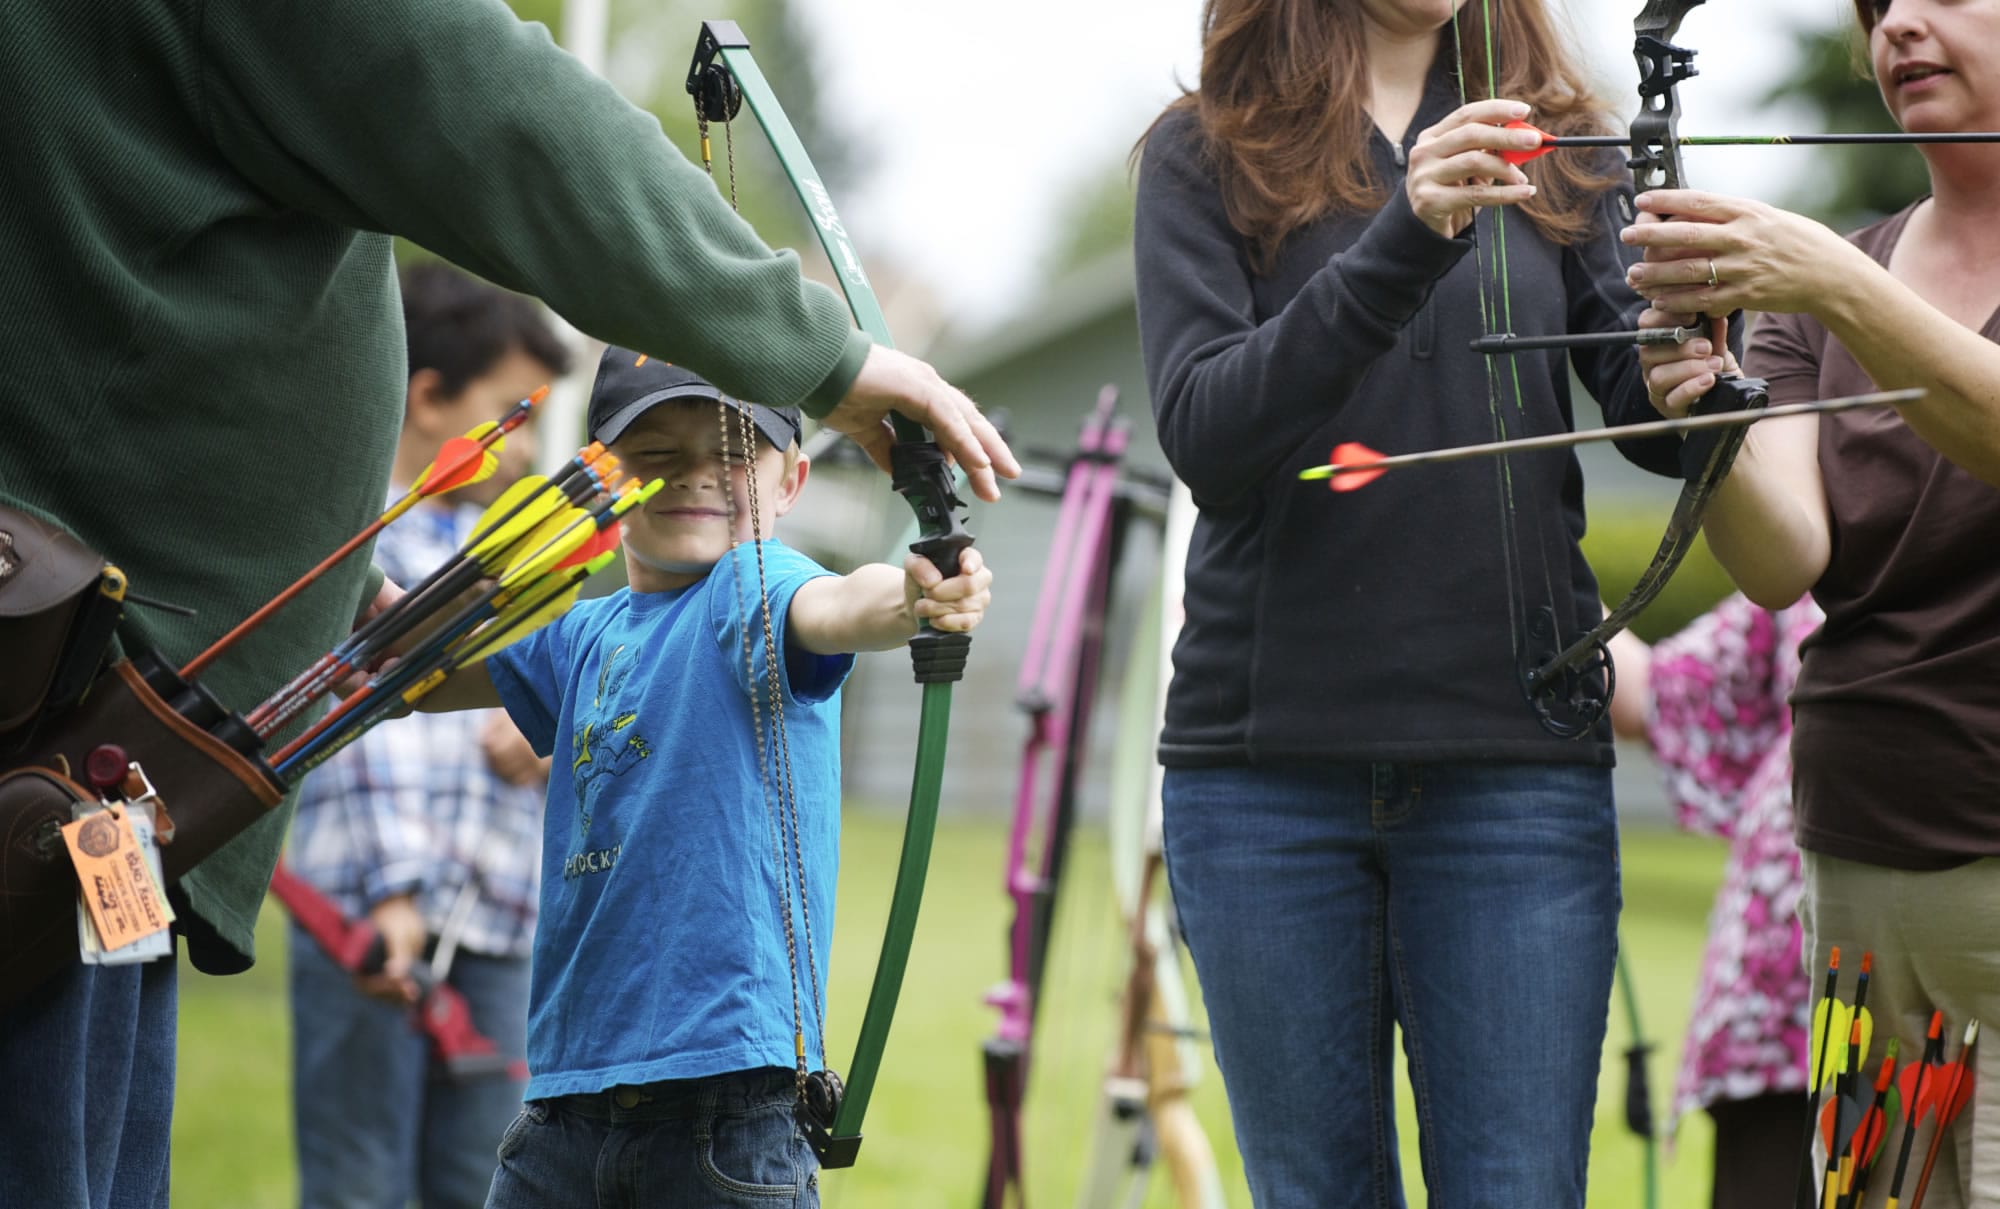 Tyler Miles, 5, from Vancouver, fires an arrow from a bow for the first time at the Get Outdoors Day event at the Fort Vancouver Visitors Center on June 9, 2012.